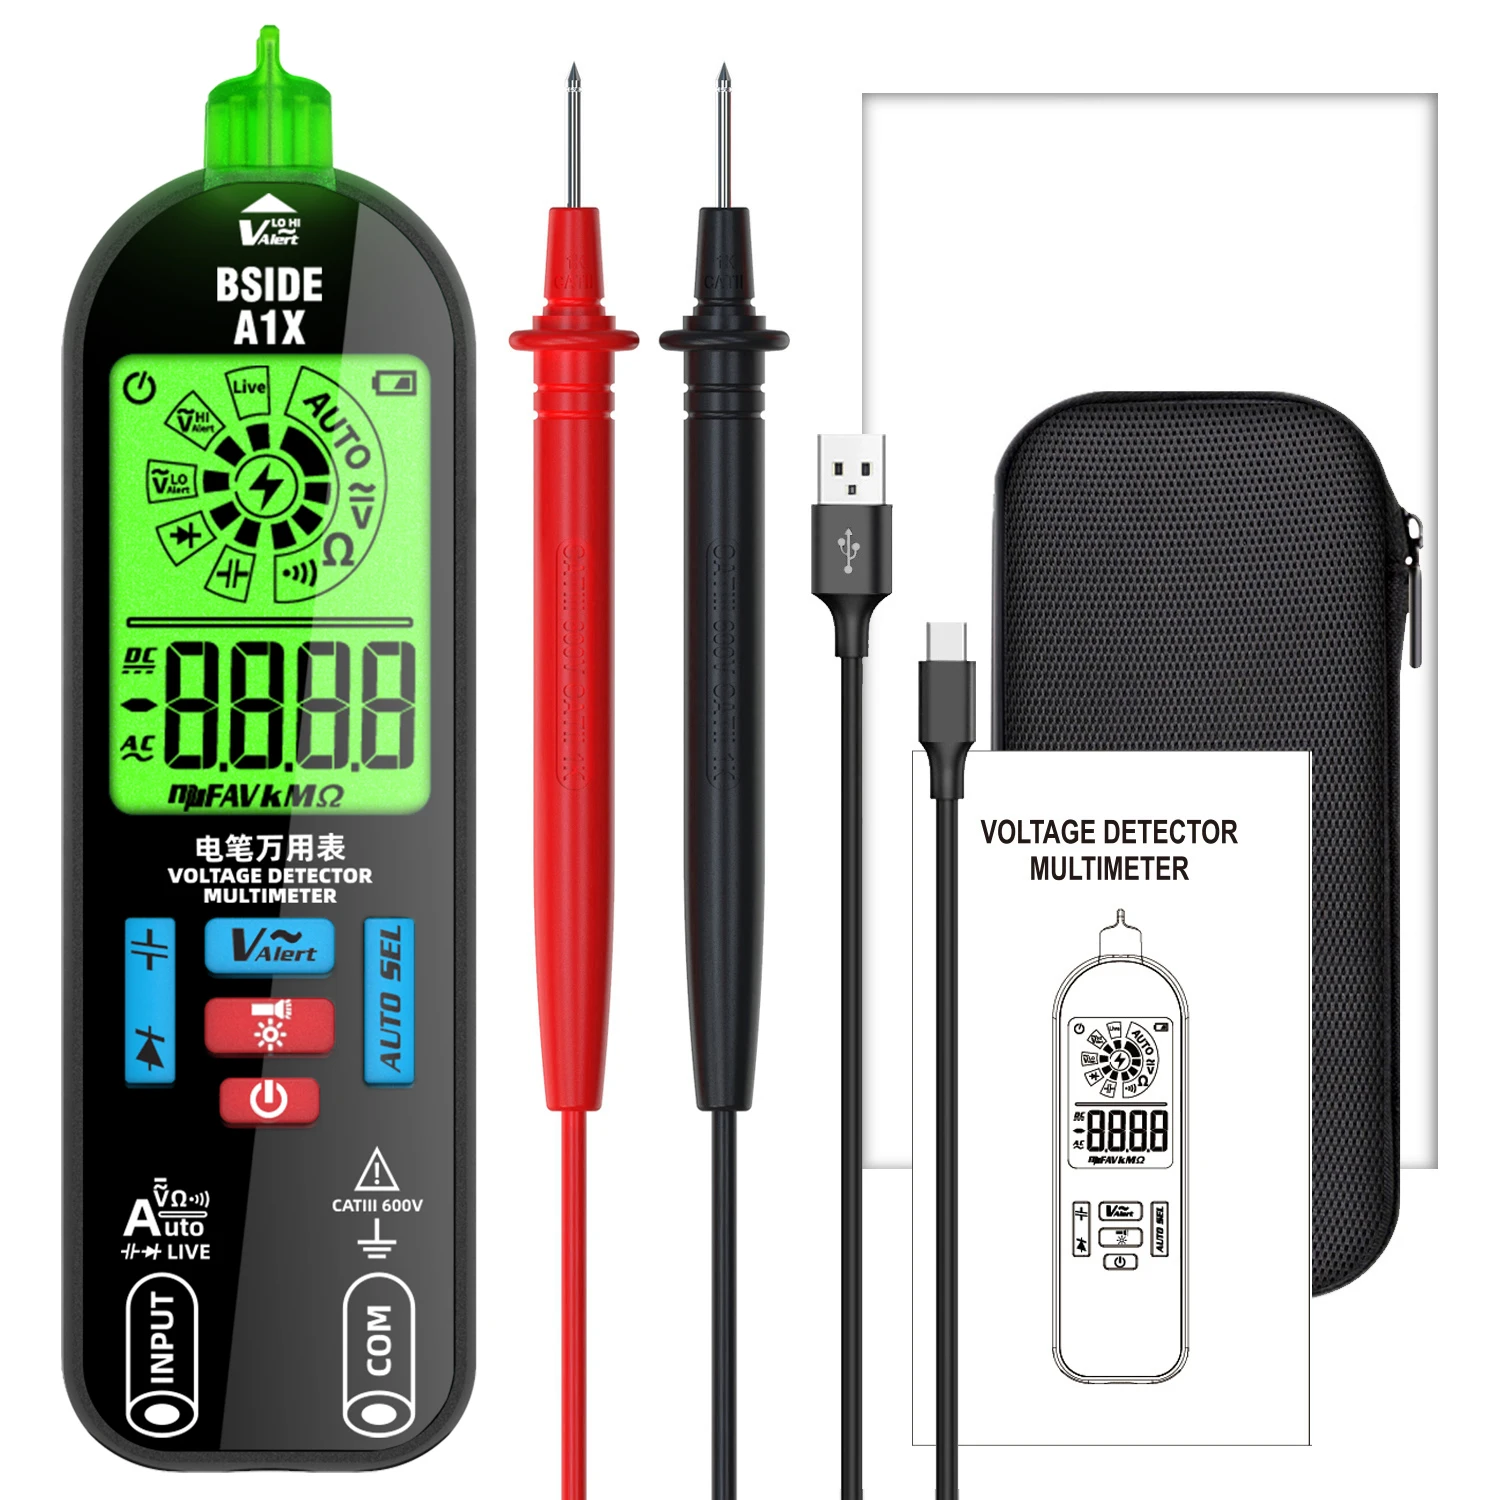 

BSIDE A1X Smart Digital Multimeter Electronic USB Tester Breakpoint AC DC Contactless NCV Charged Automatic Diode Capacitor